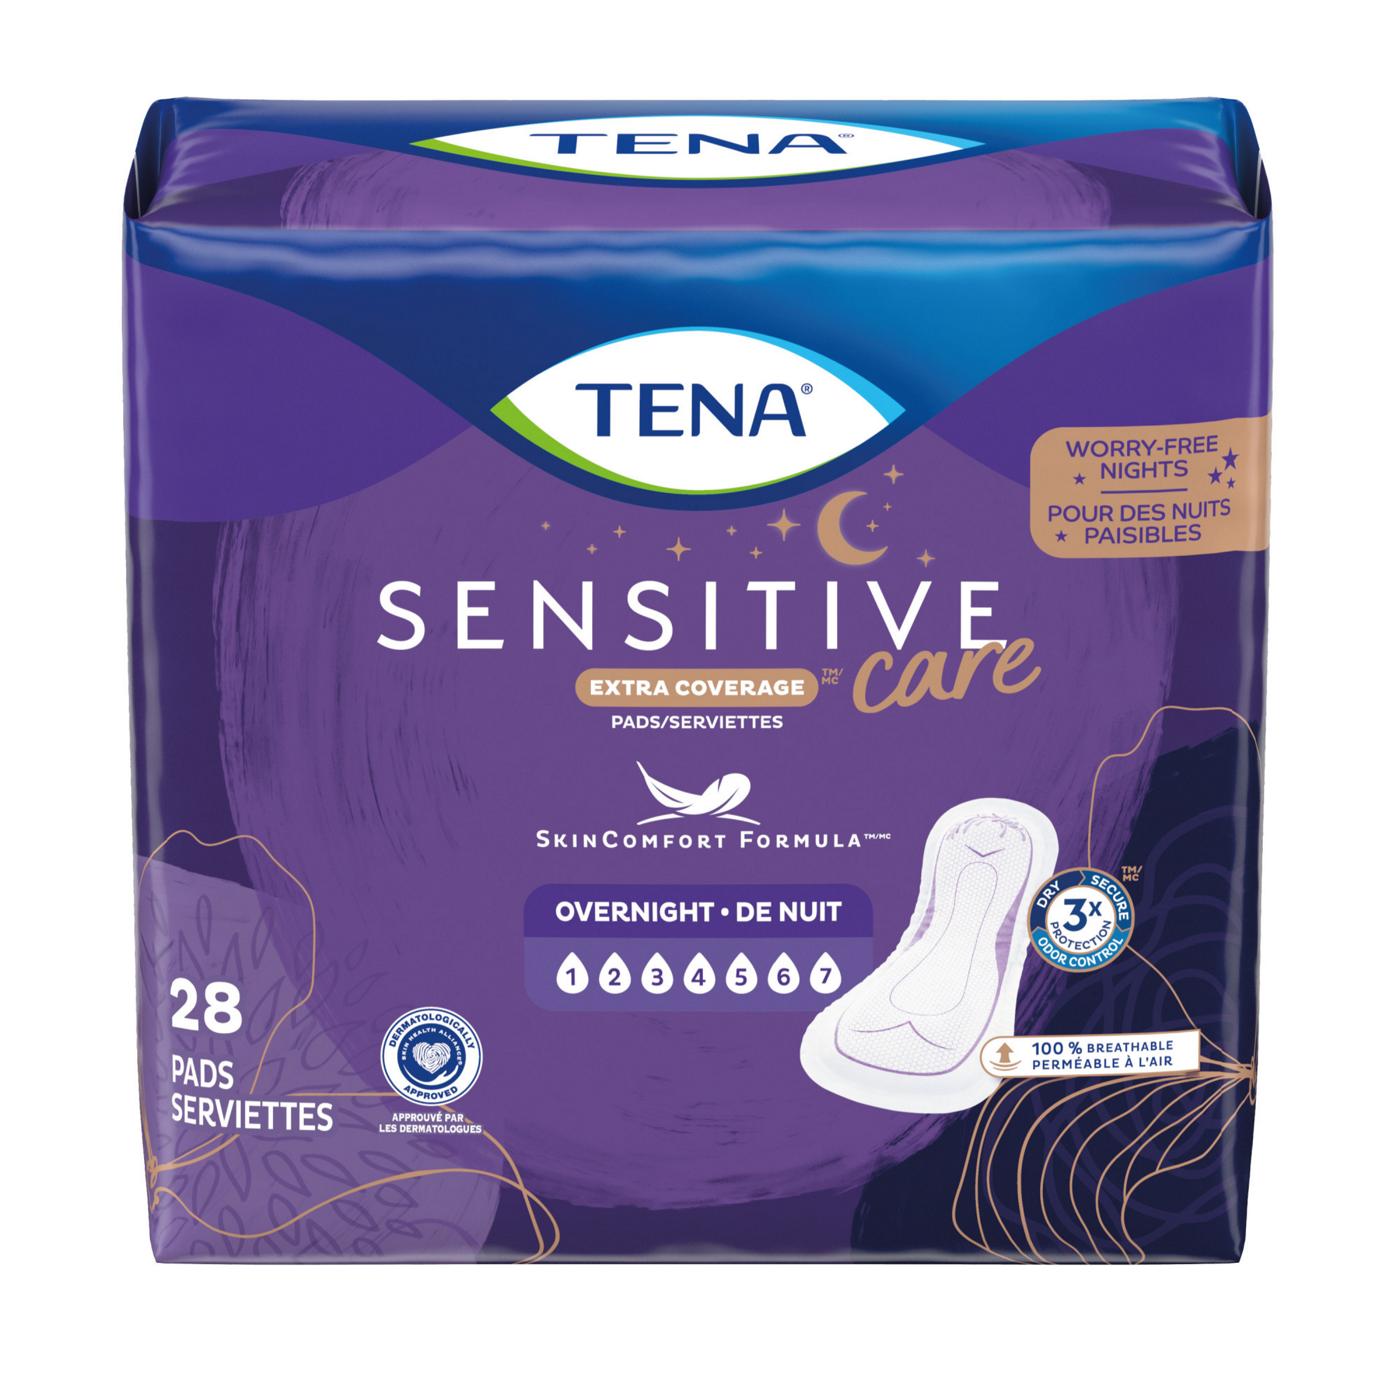 Tena Sensitive Care Extra Coverage Overnight Incontinence Pads; image 1 of 9